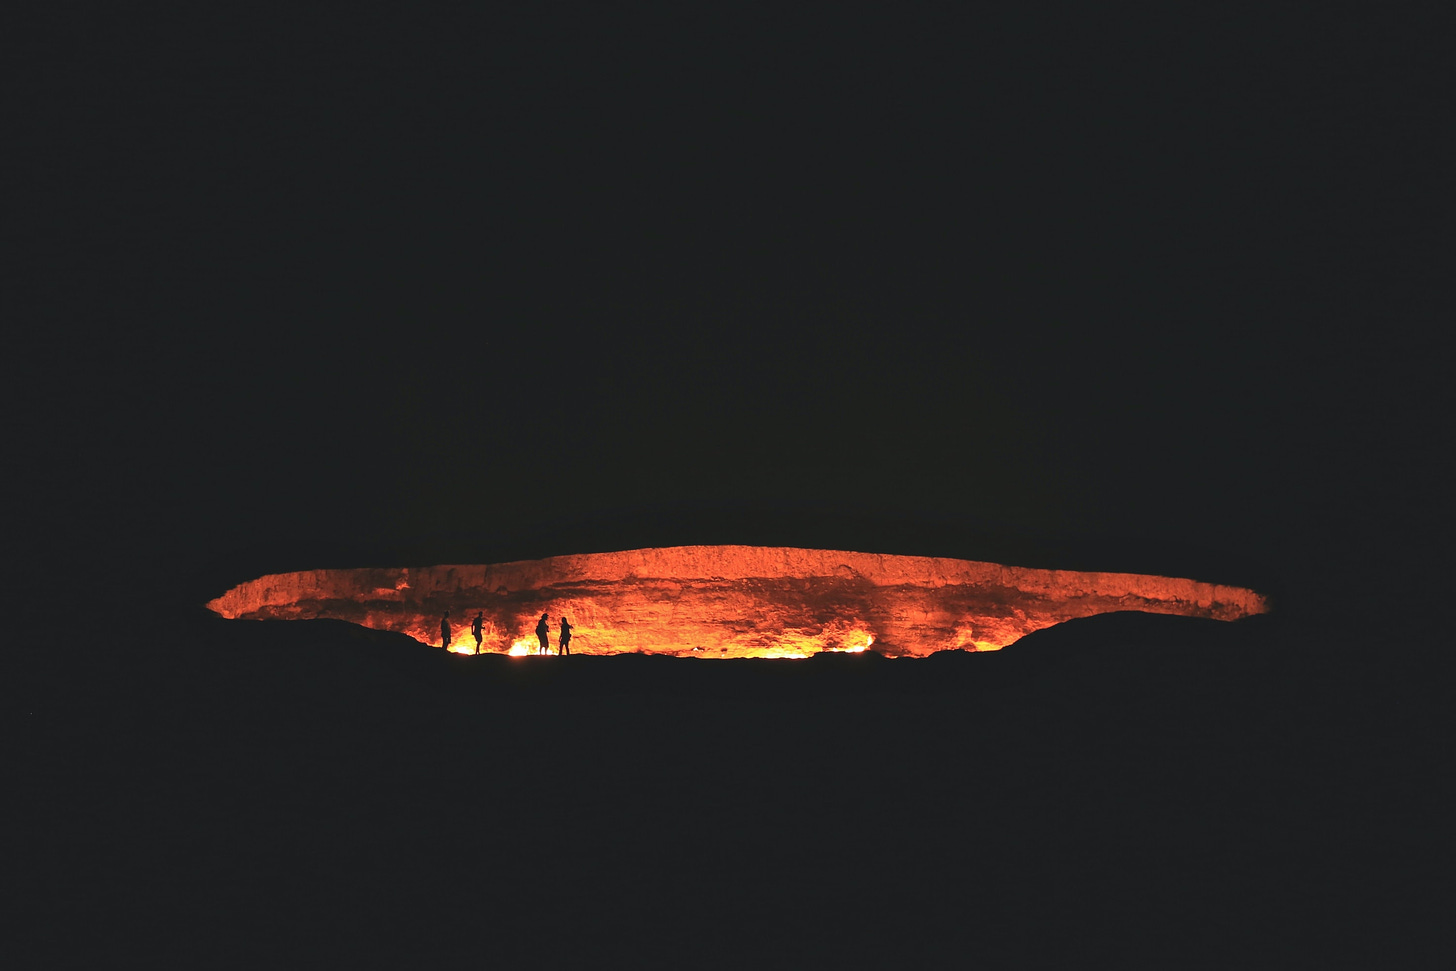 People near cave that is lit up by fire.